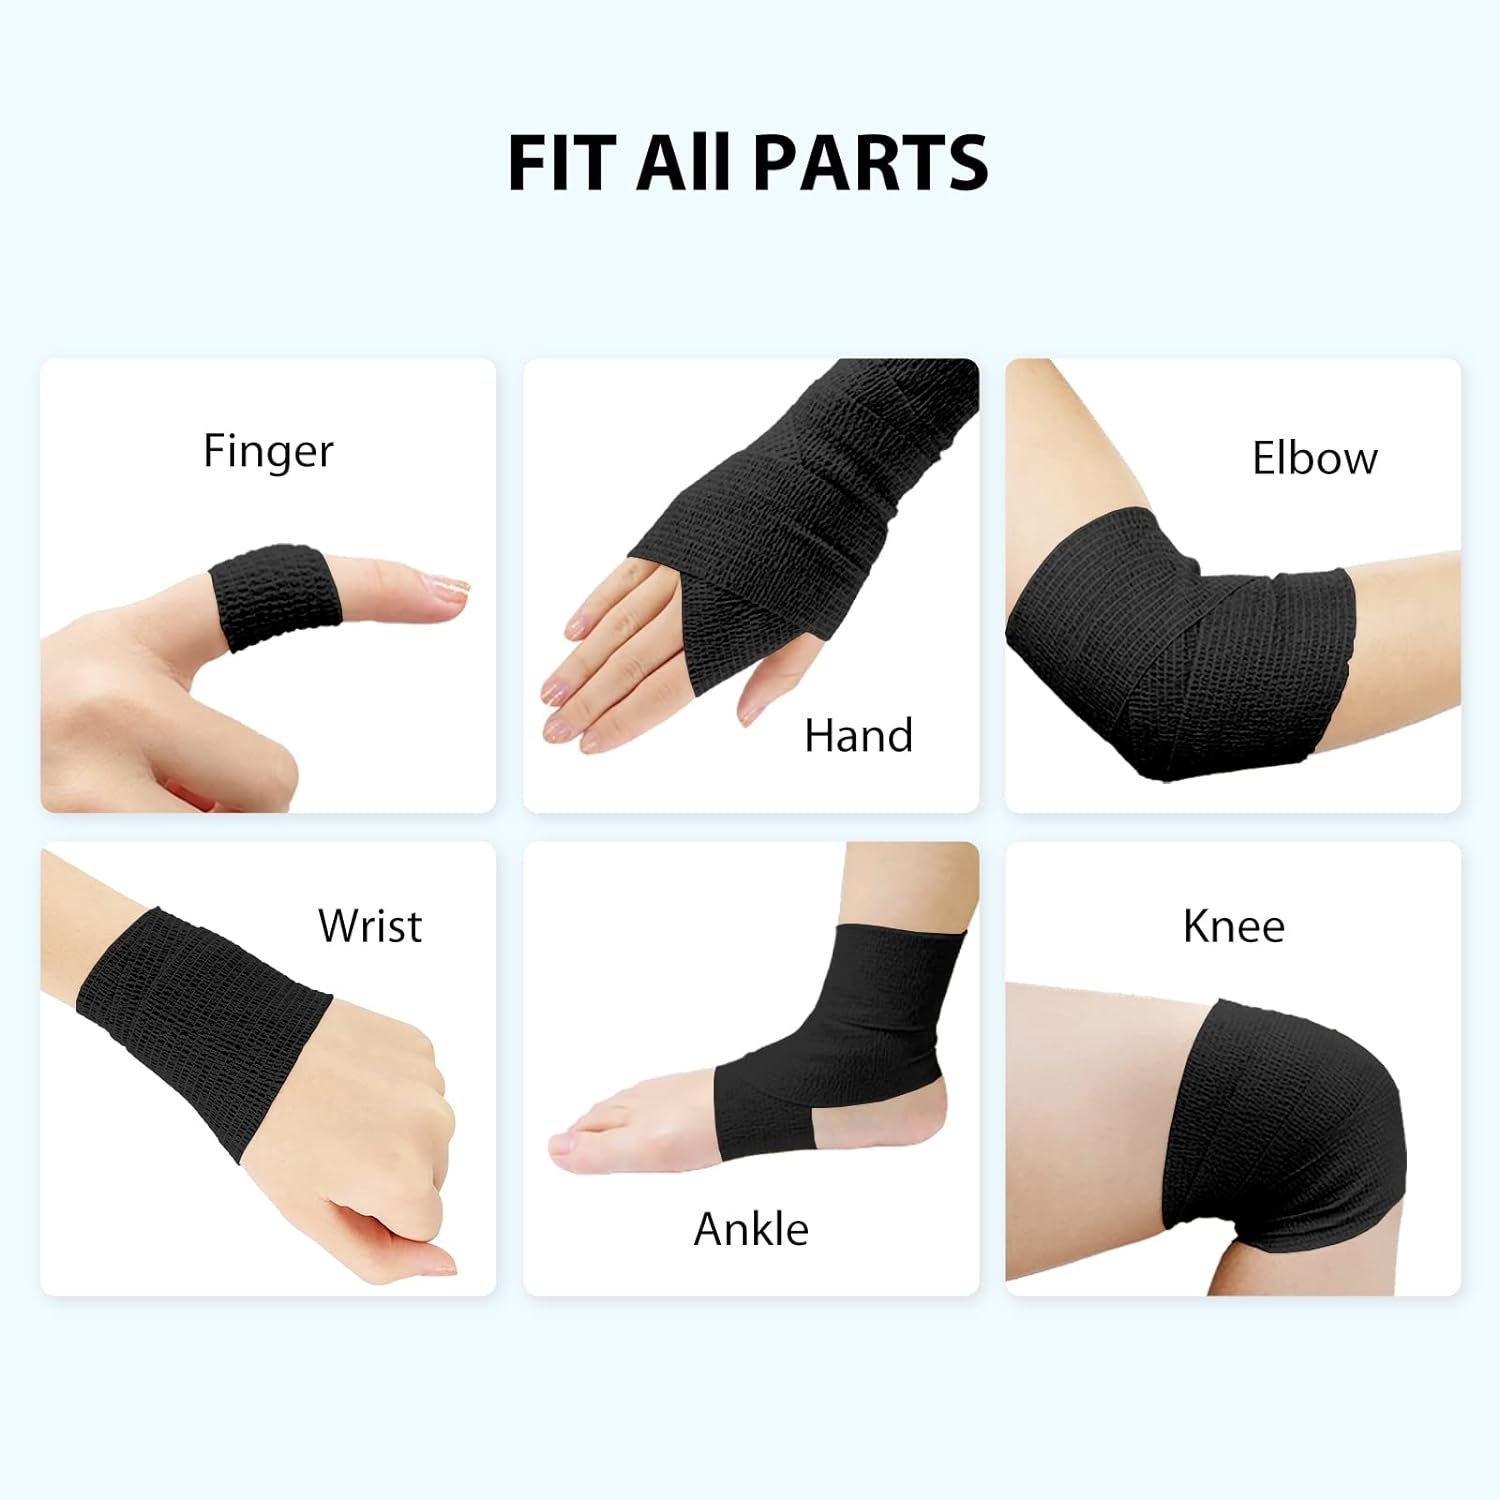 FriCARE Nonwoven Self-Adhesive Bandage, Self-Adherent Cohesive First Aid Medical Wrap, Elastic Athletic/Vet Tape for Wrist 2 Inches Wide